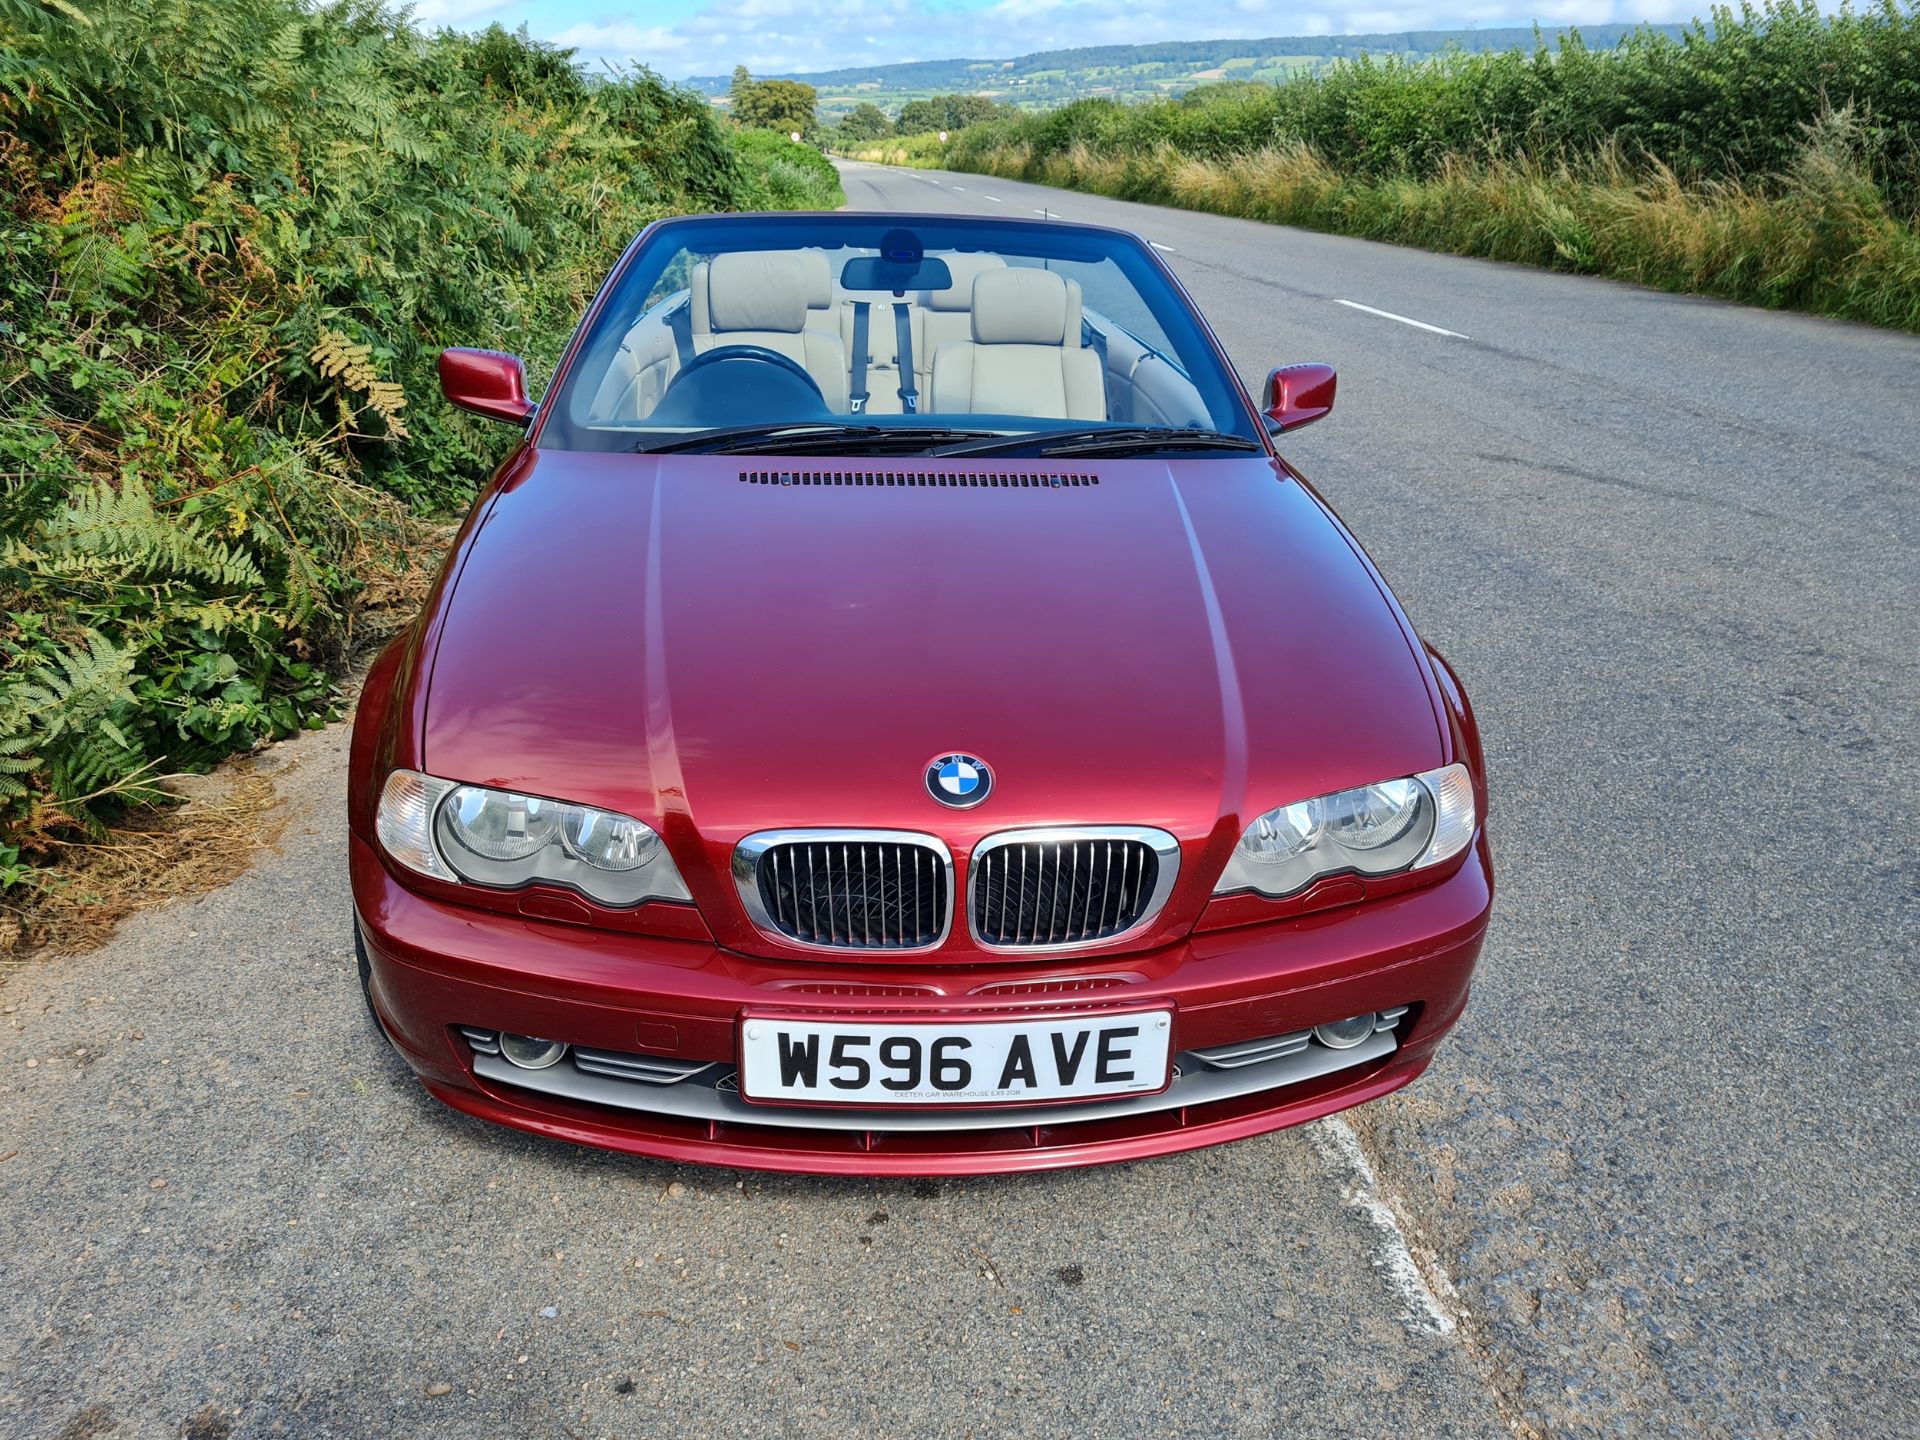 2000 BMW 330Ci Convertible Registration number W596 AVE Chassis number WBABS52060EH92204 Engine - Image 5 of 16